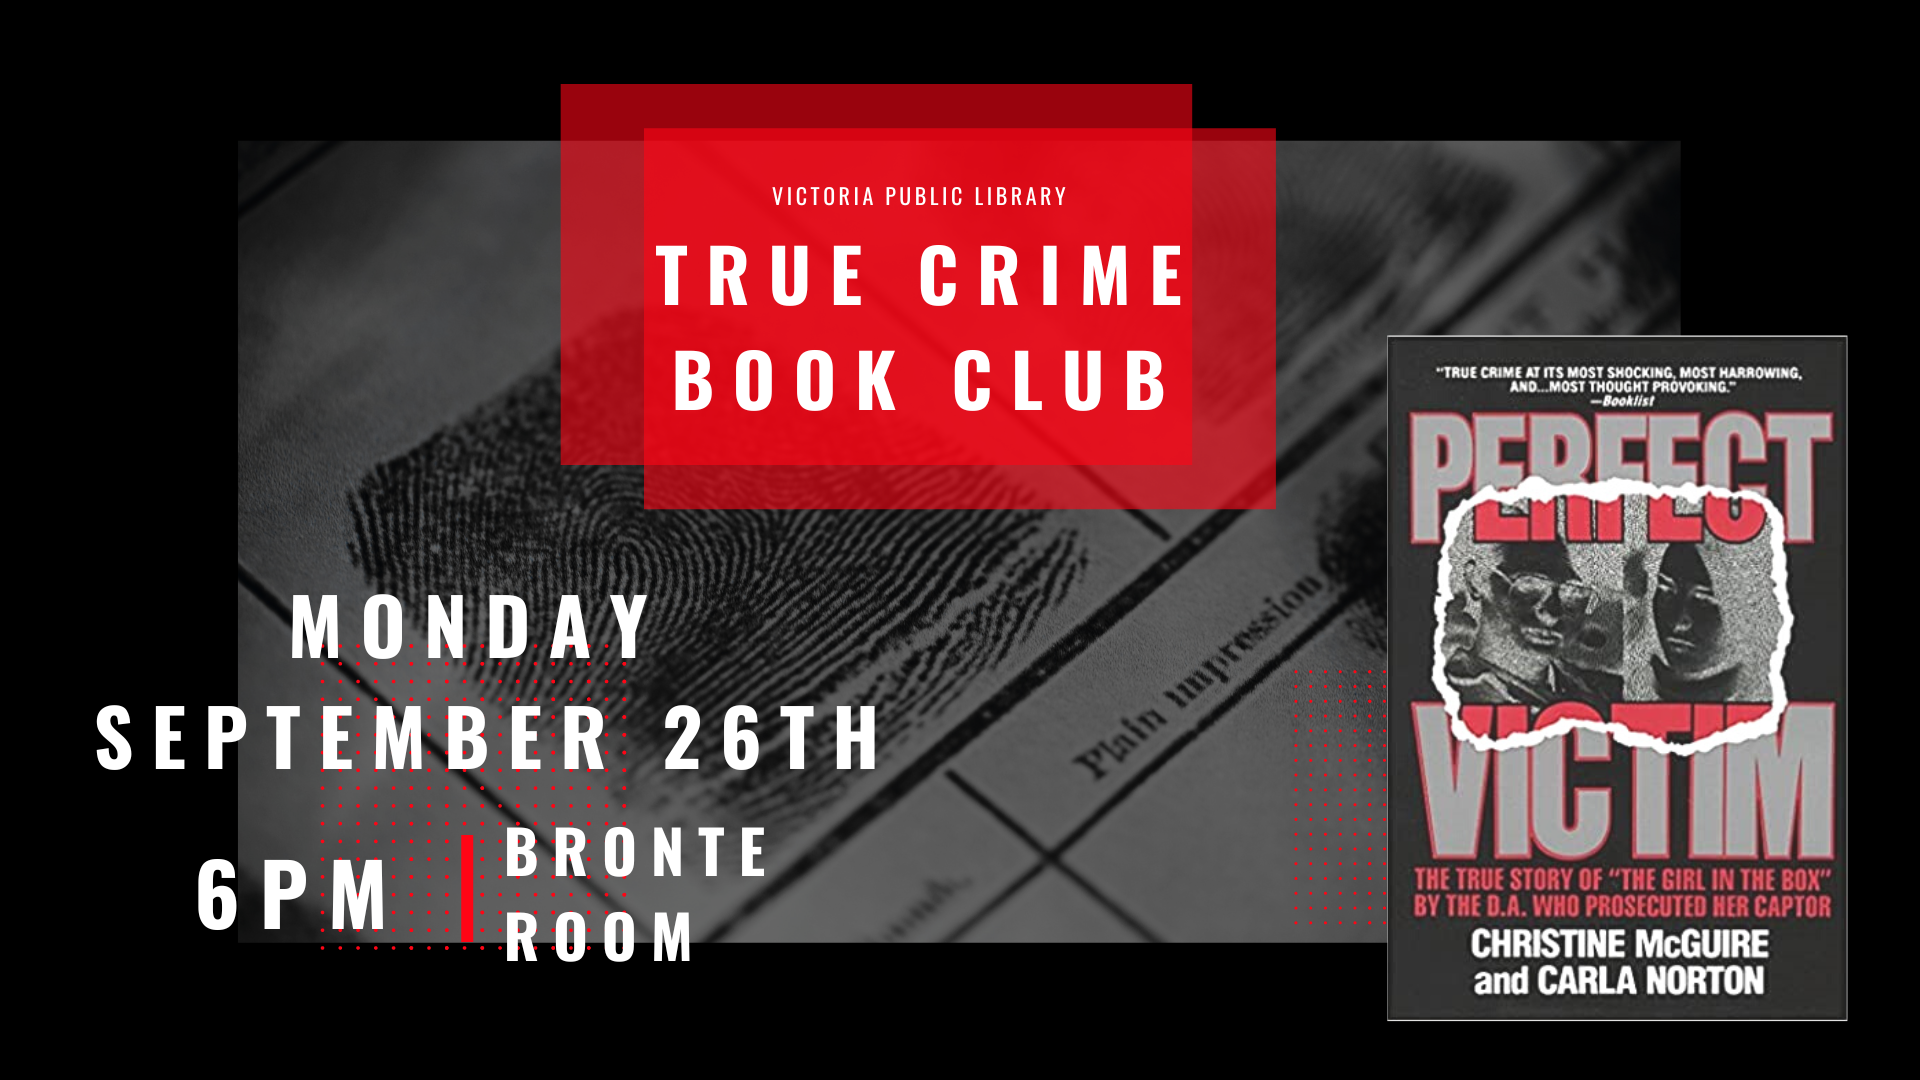 True Crime Book Club, September 26th at 6pm, Perfect Victim by Christine McGuire